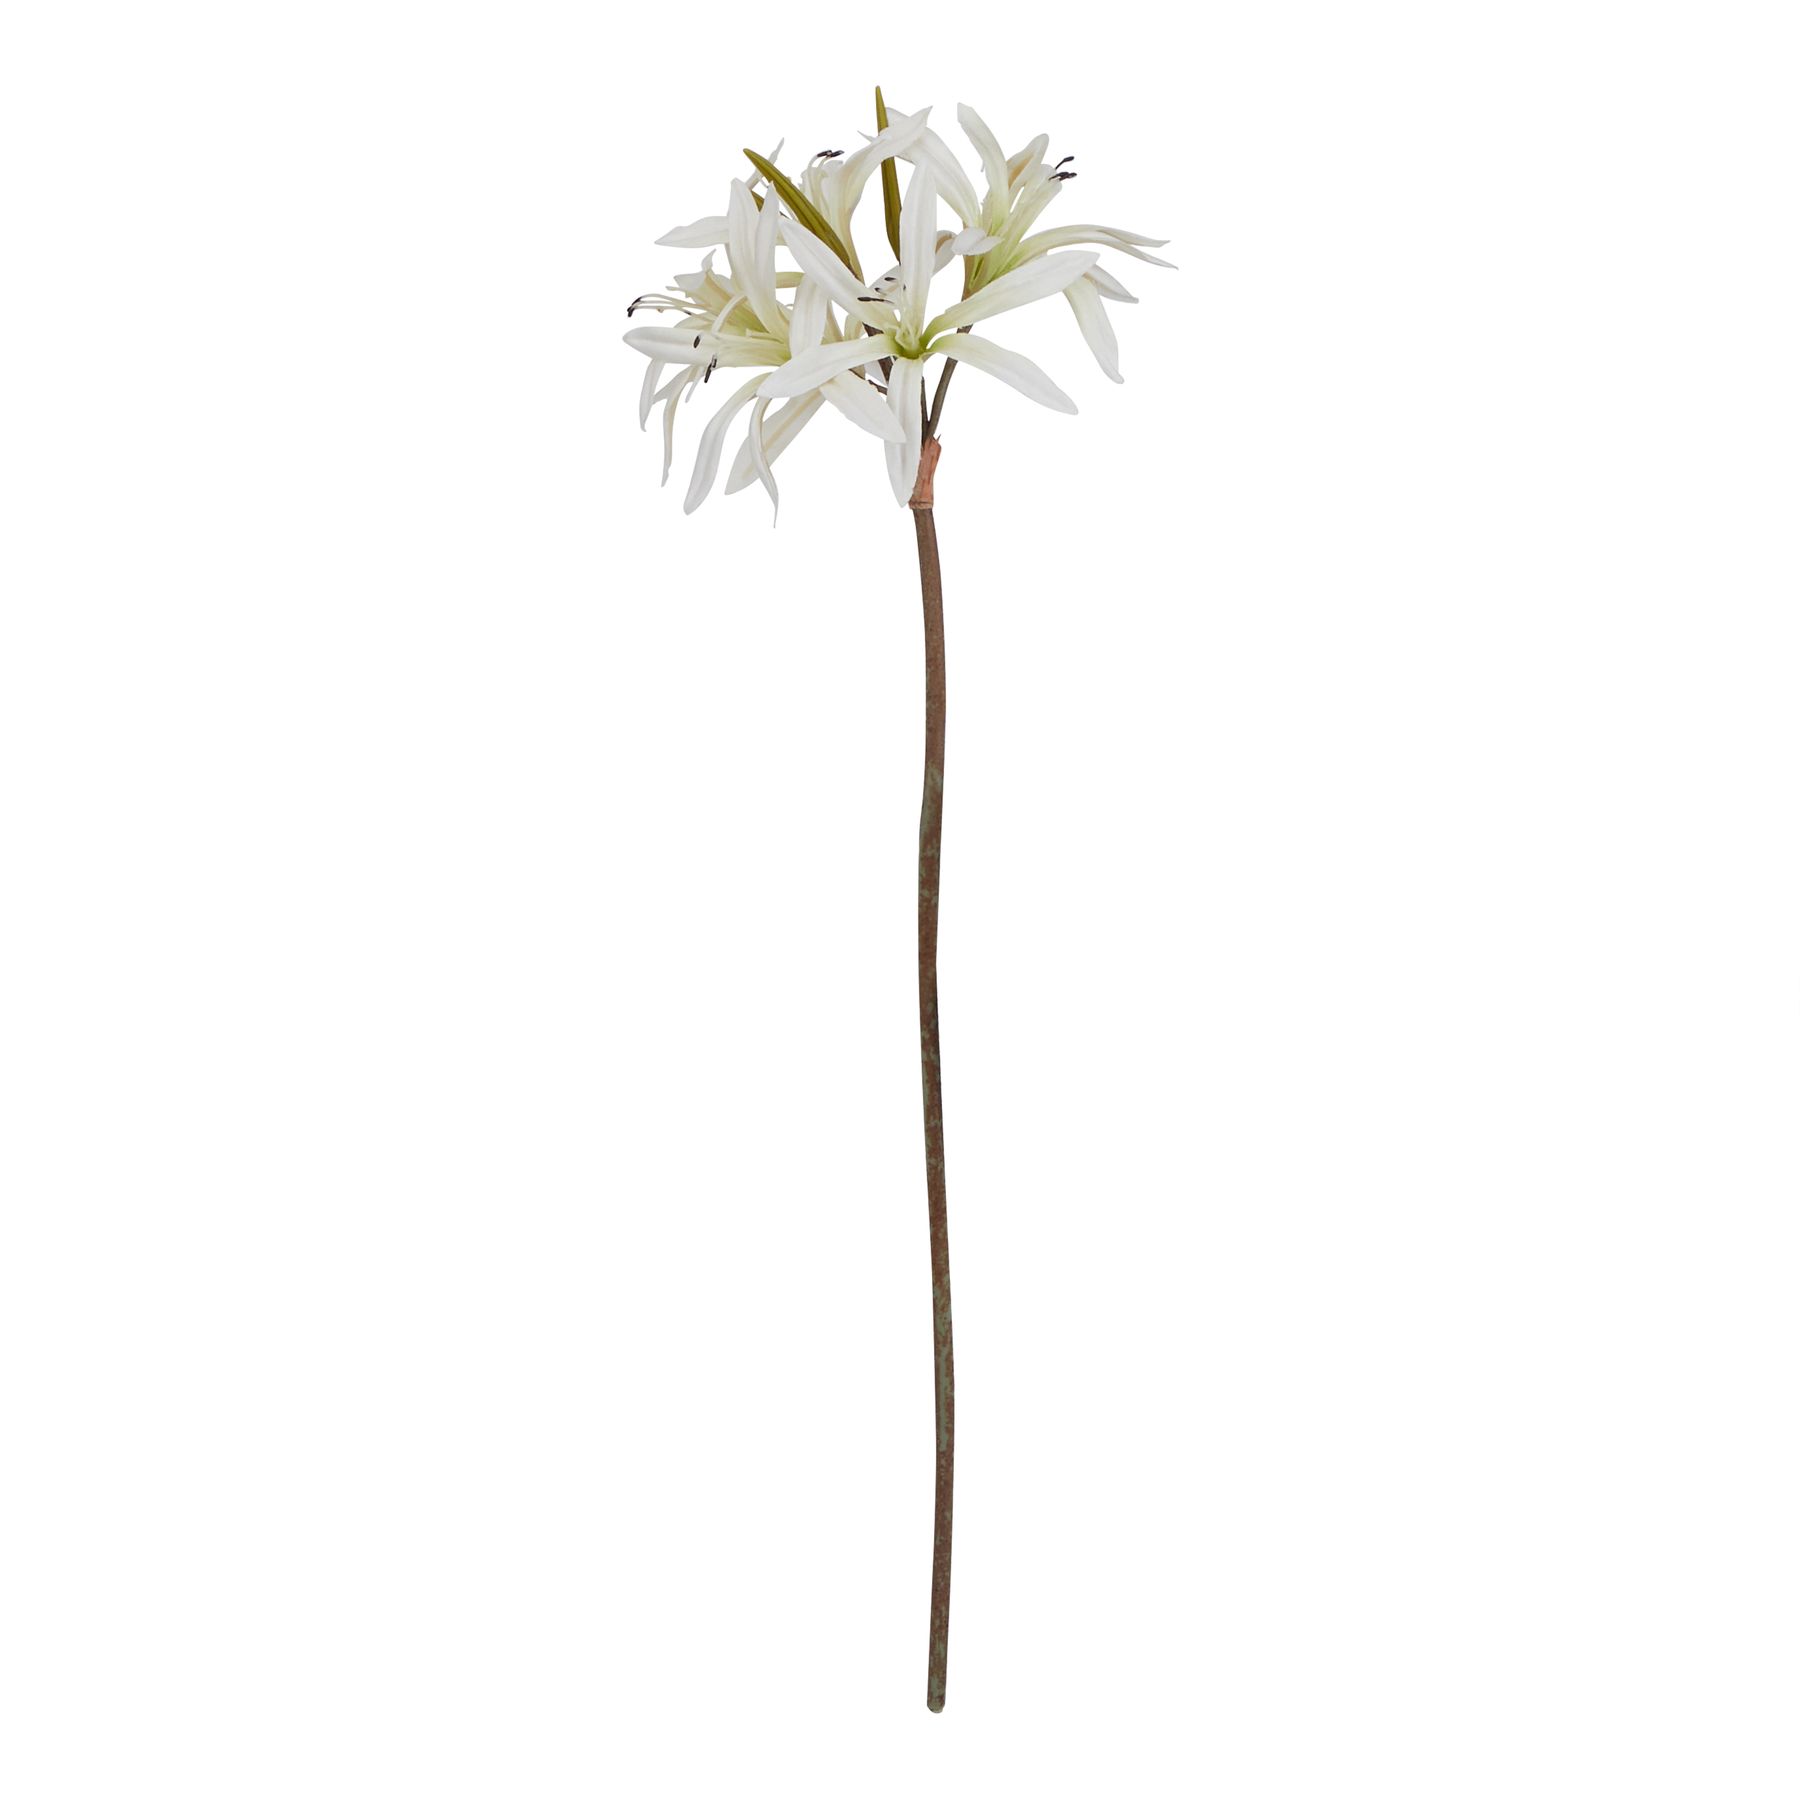 The Natural Garden Collection White Nerine Lily Stem - Image 1